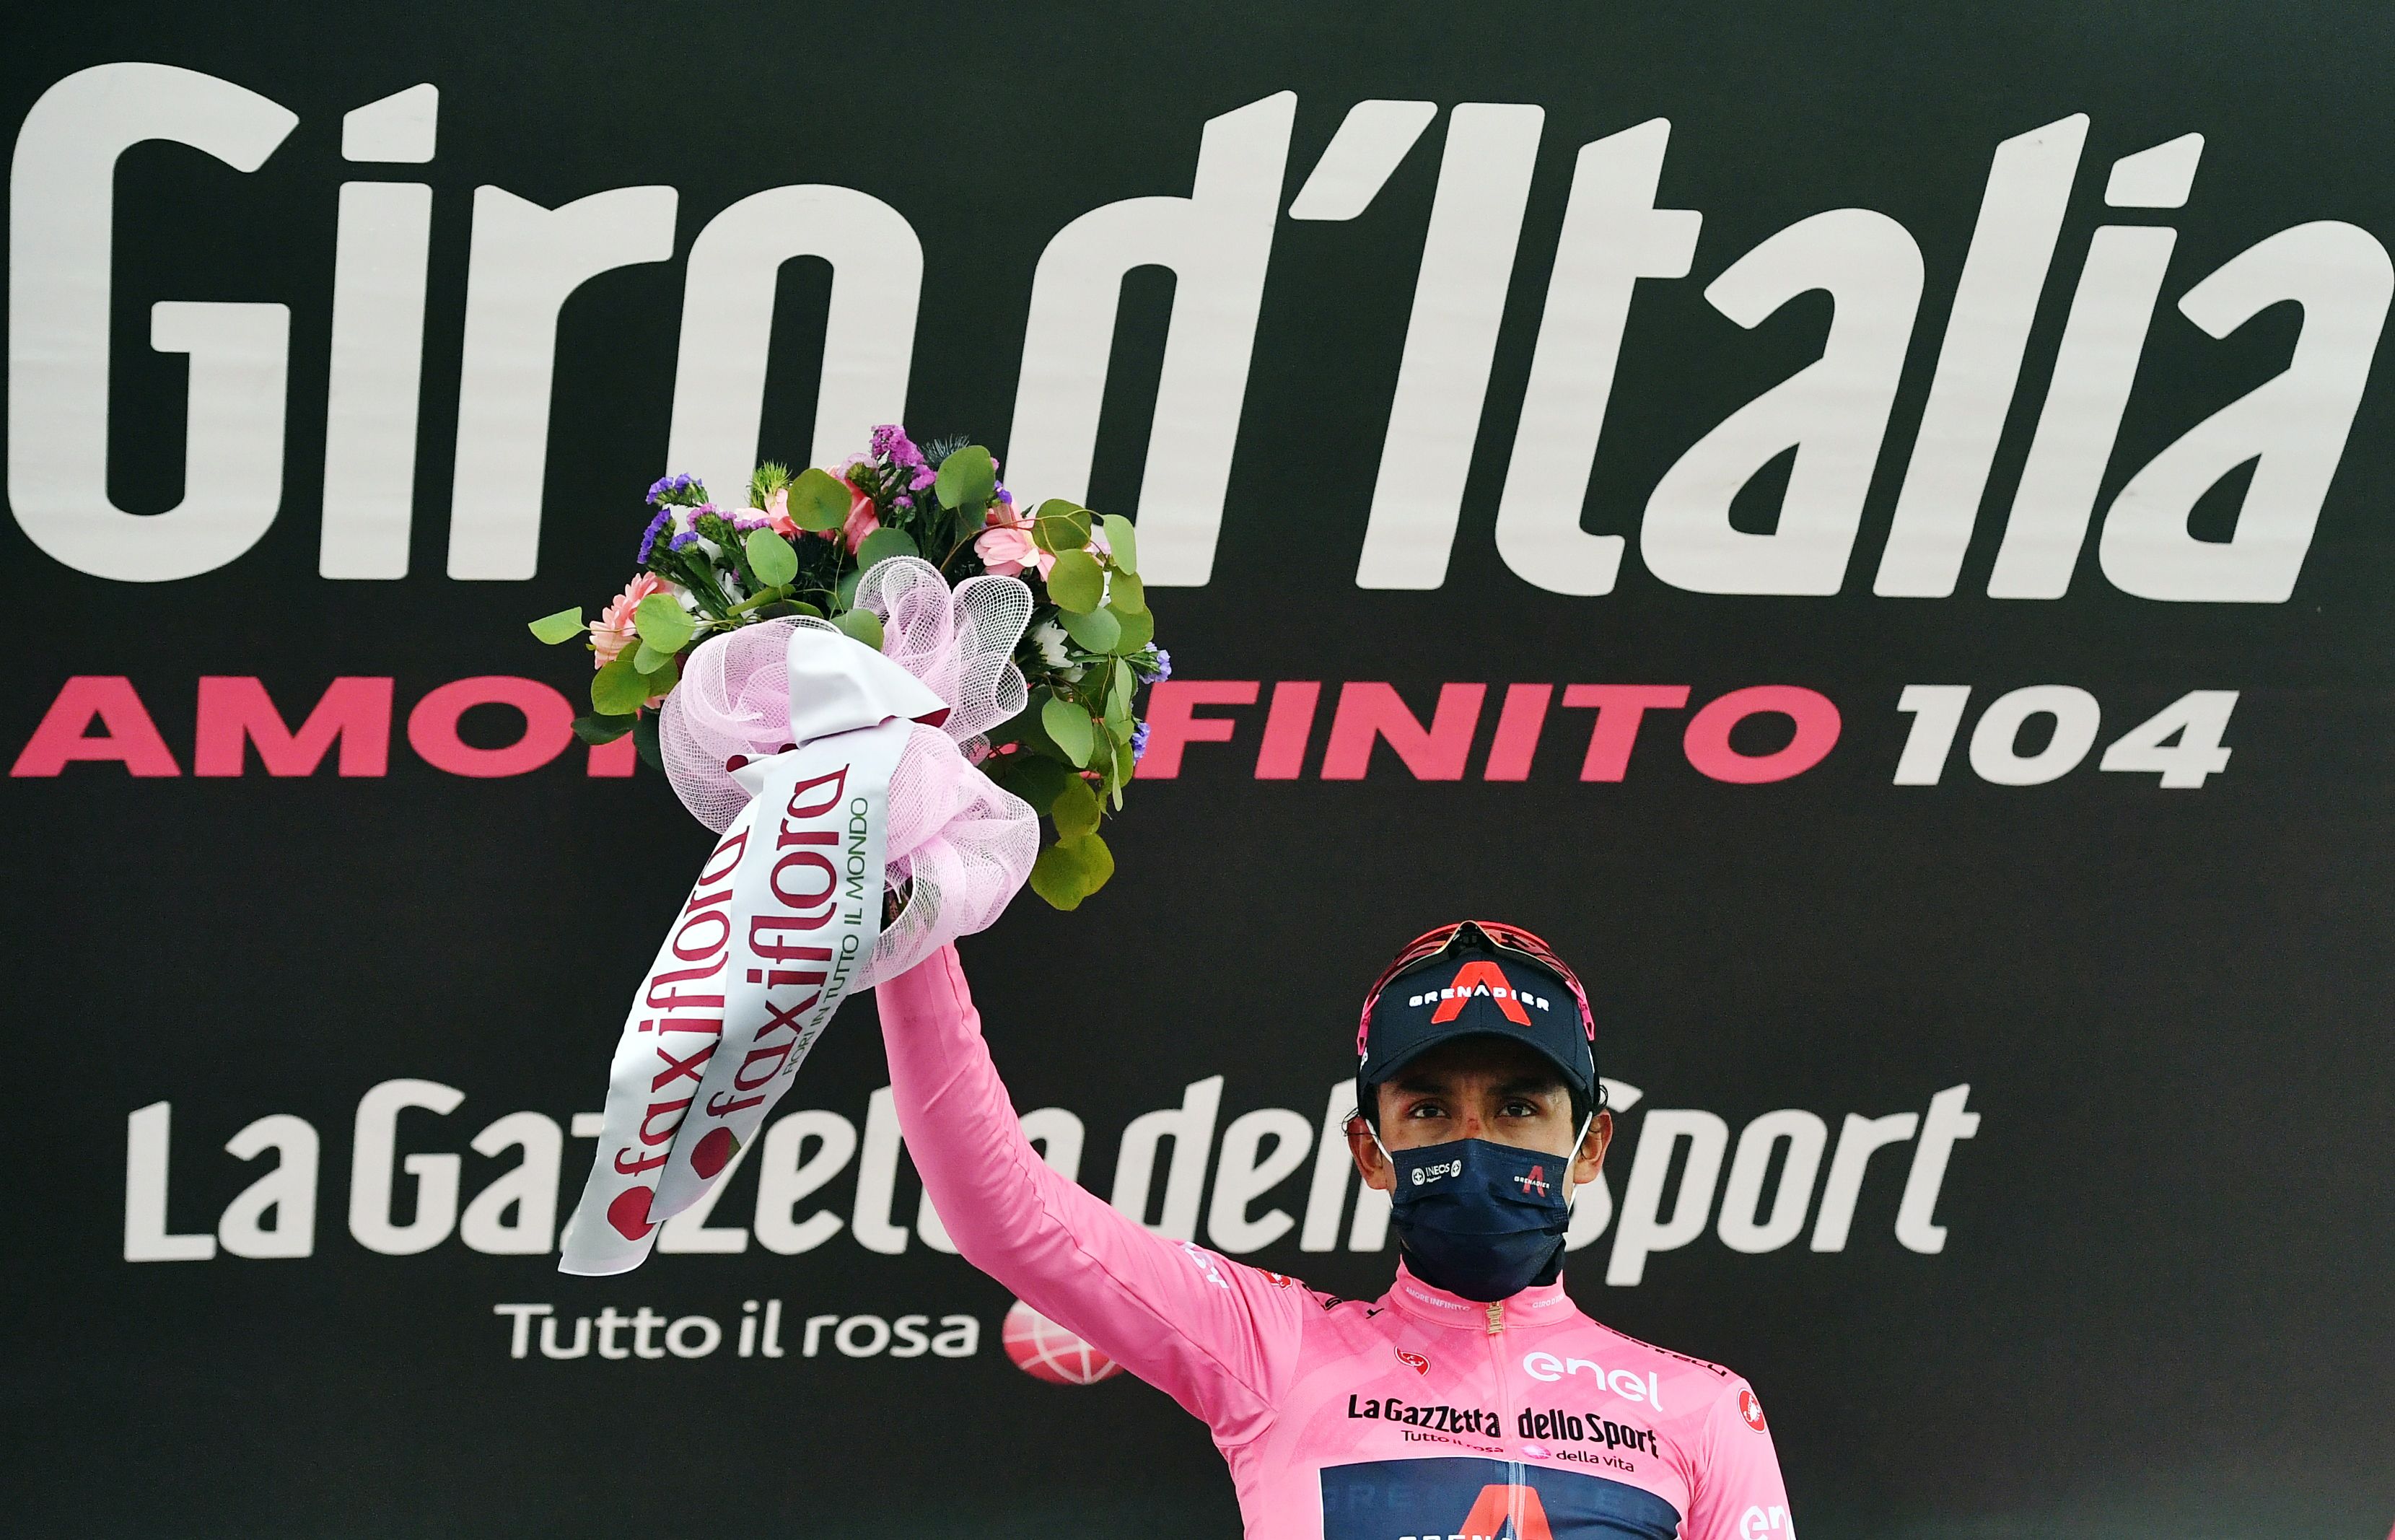 Cycling - Giro d'Italia - Stage 14 - Cittadella to Monte Zoncolan, Italy - May 22, 2021 Ineos Grenadiers rider Egan Arley Bernal Gomez of Colombia celebrates wearing the maglia rosa on the podium after stage 14 REUTERS/Jennifer Lorenzini